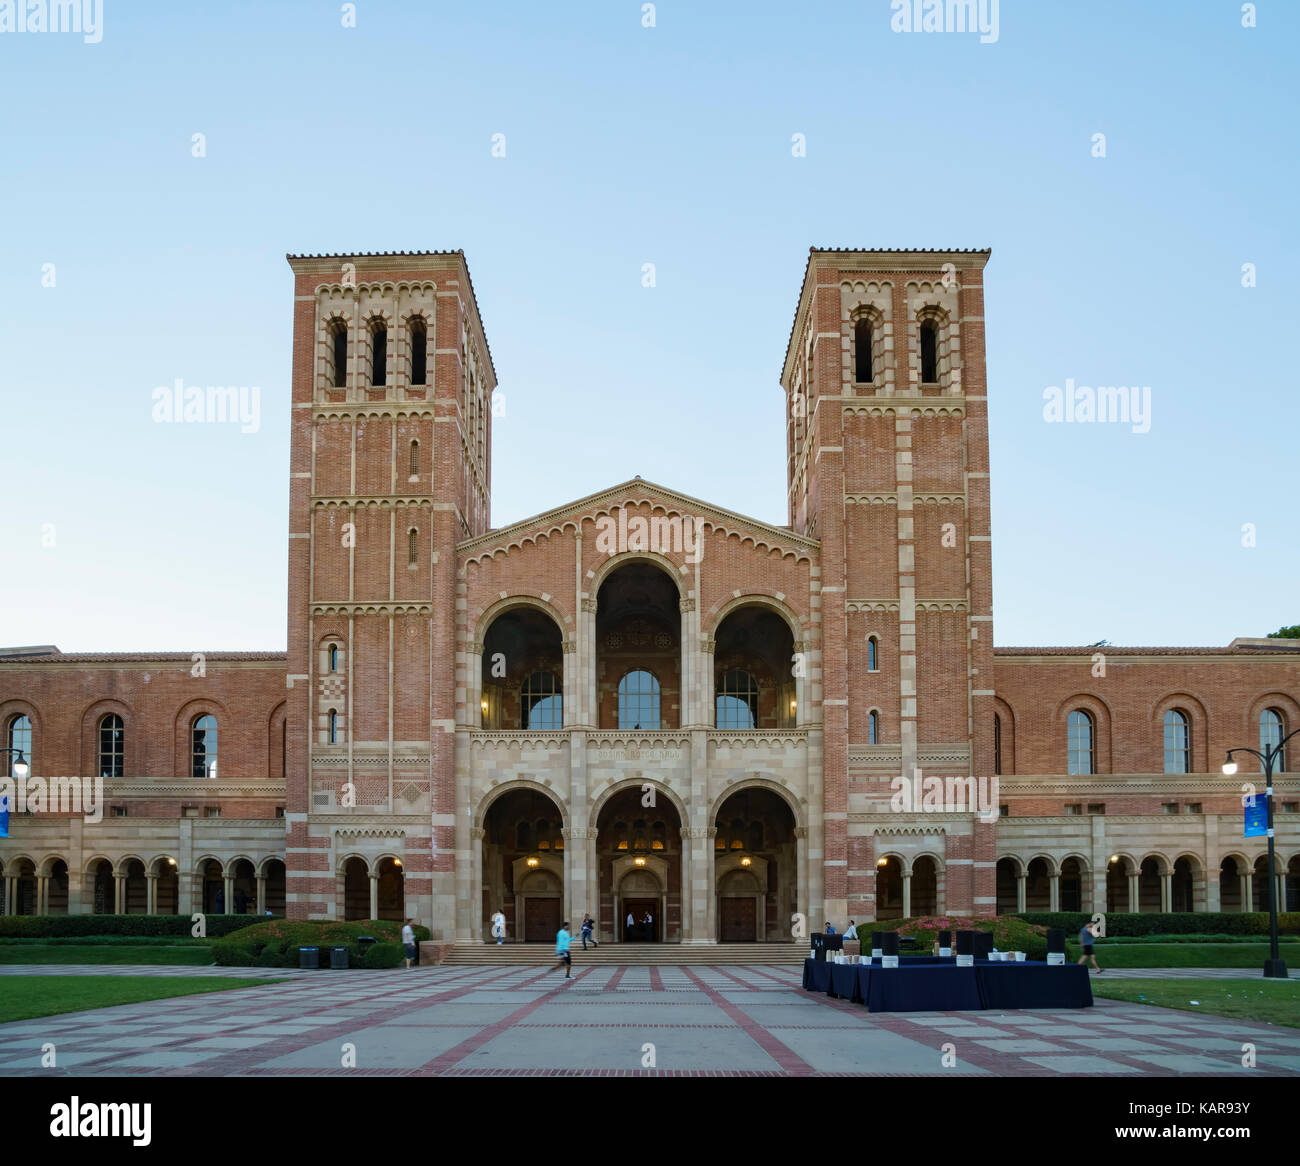 Westwood, JUN 21: Royce Hall of UCLA on JUN 21, 2017 at Westwood, Los Angeles County, California, United States Stock Photo